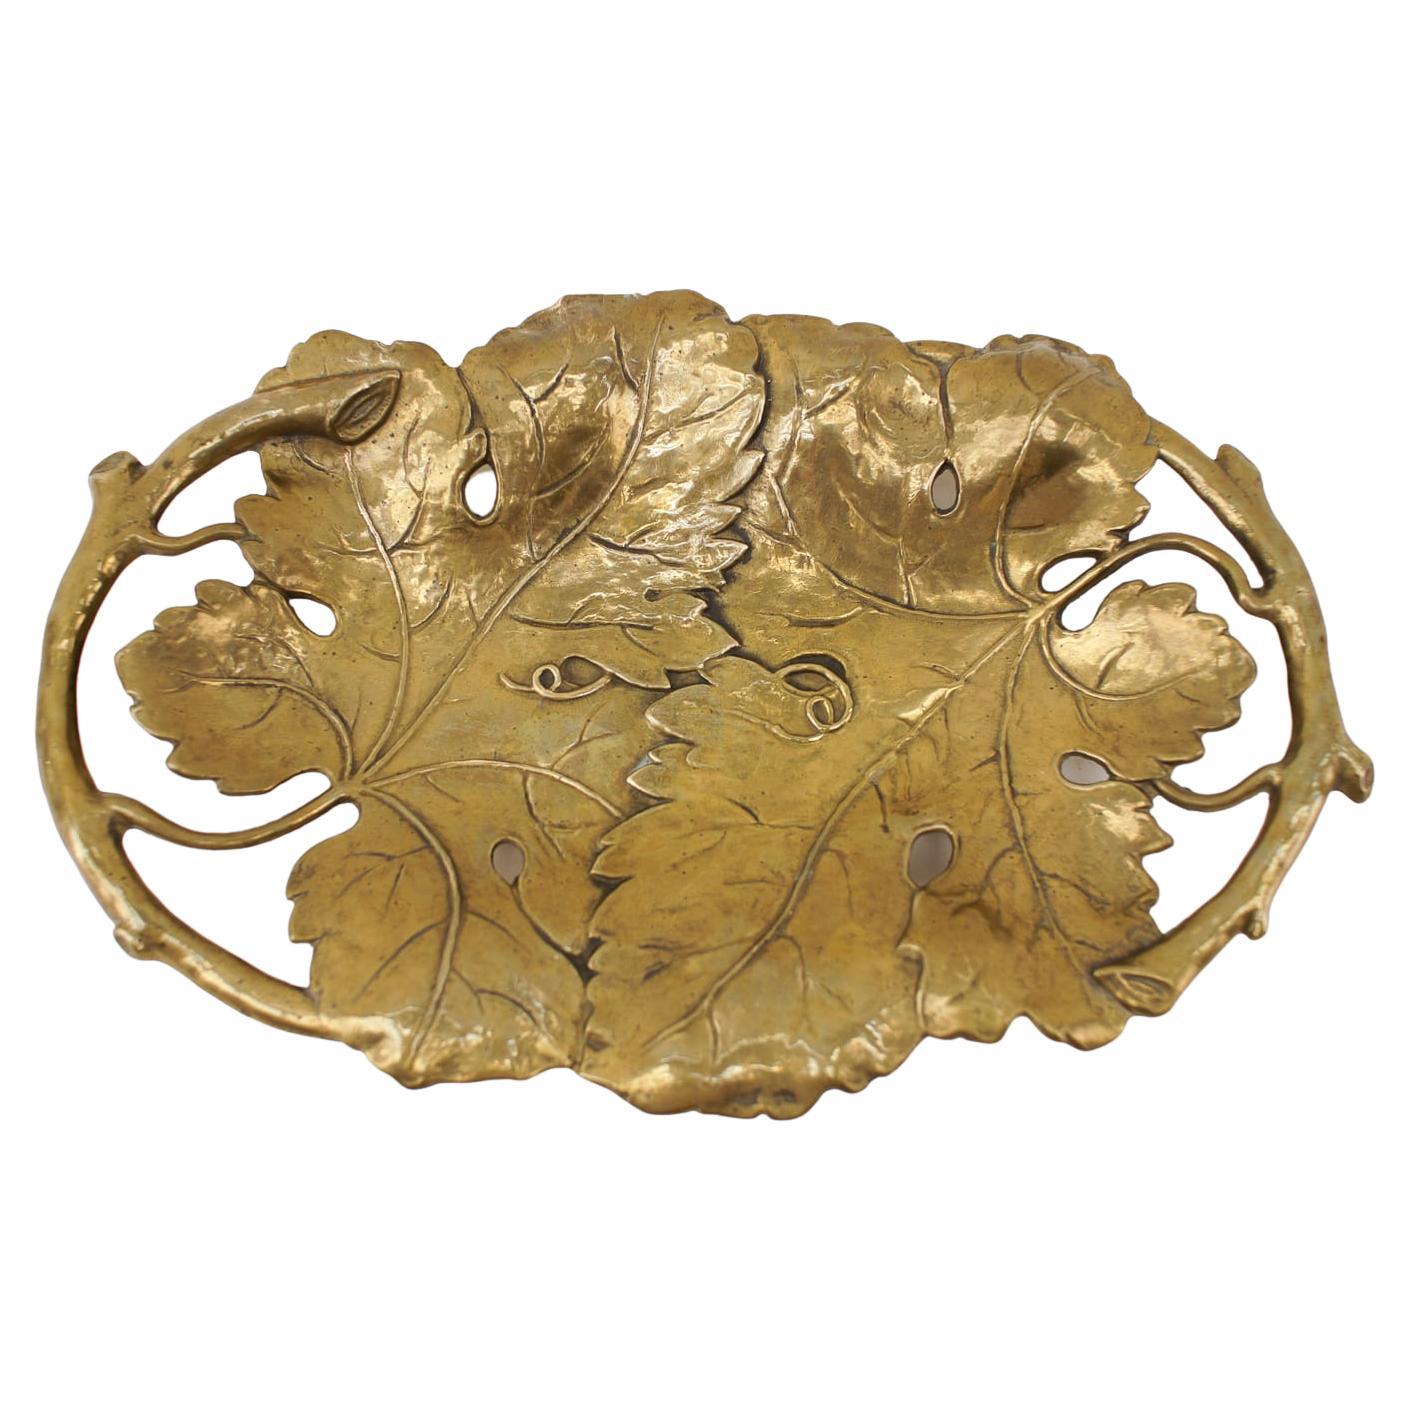 Two Vine Leaves Hand Formed into a Solid Brass Bowl, 1960s For Sale